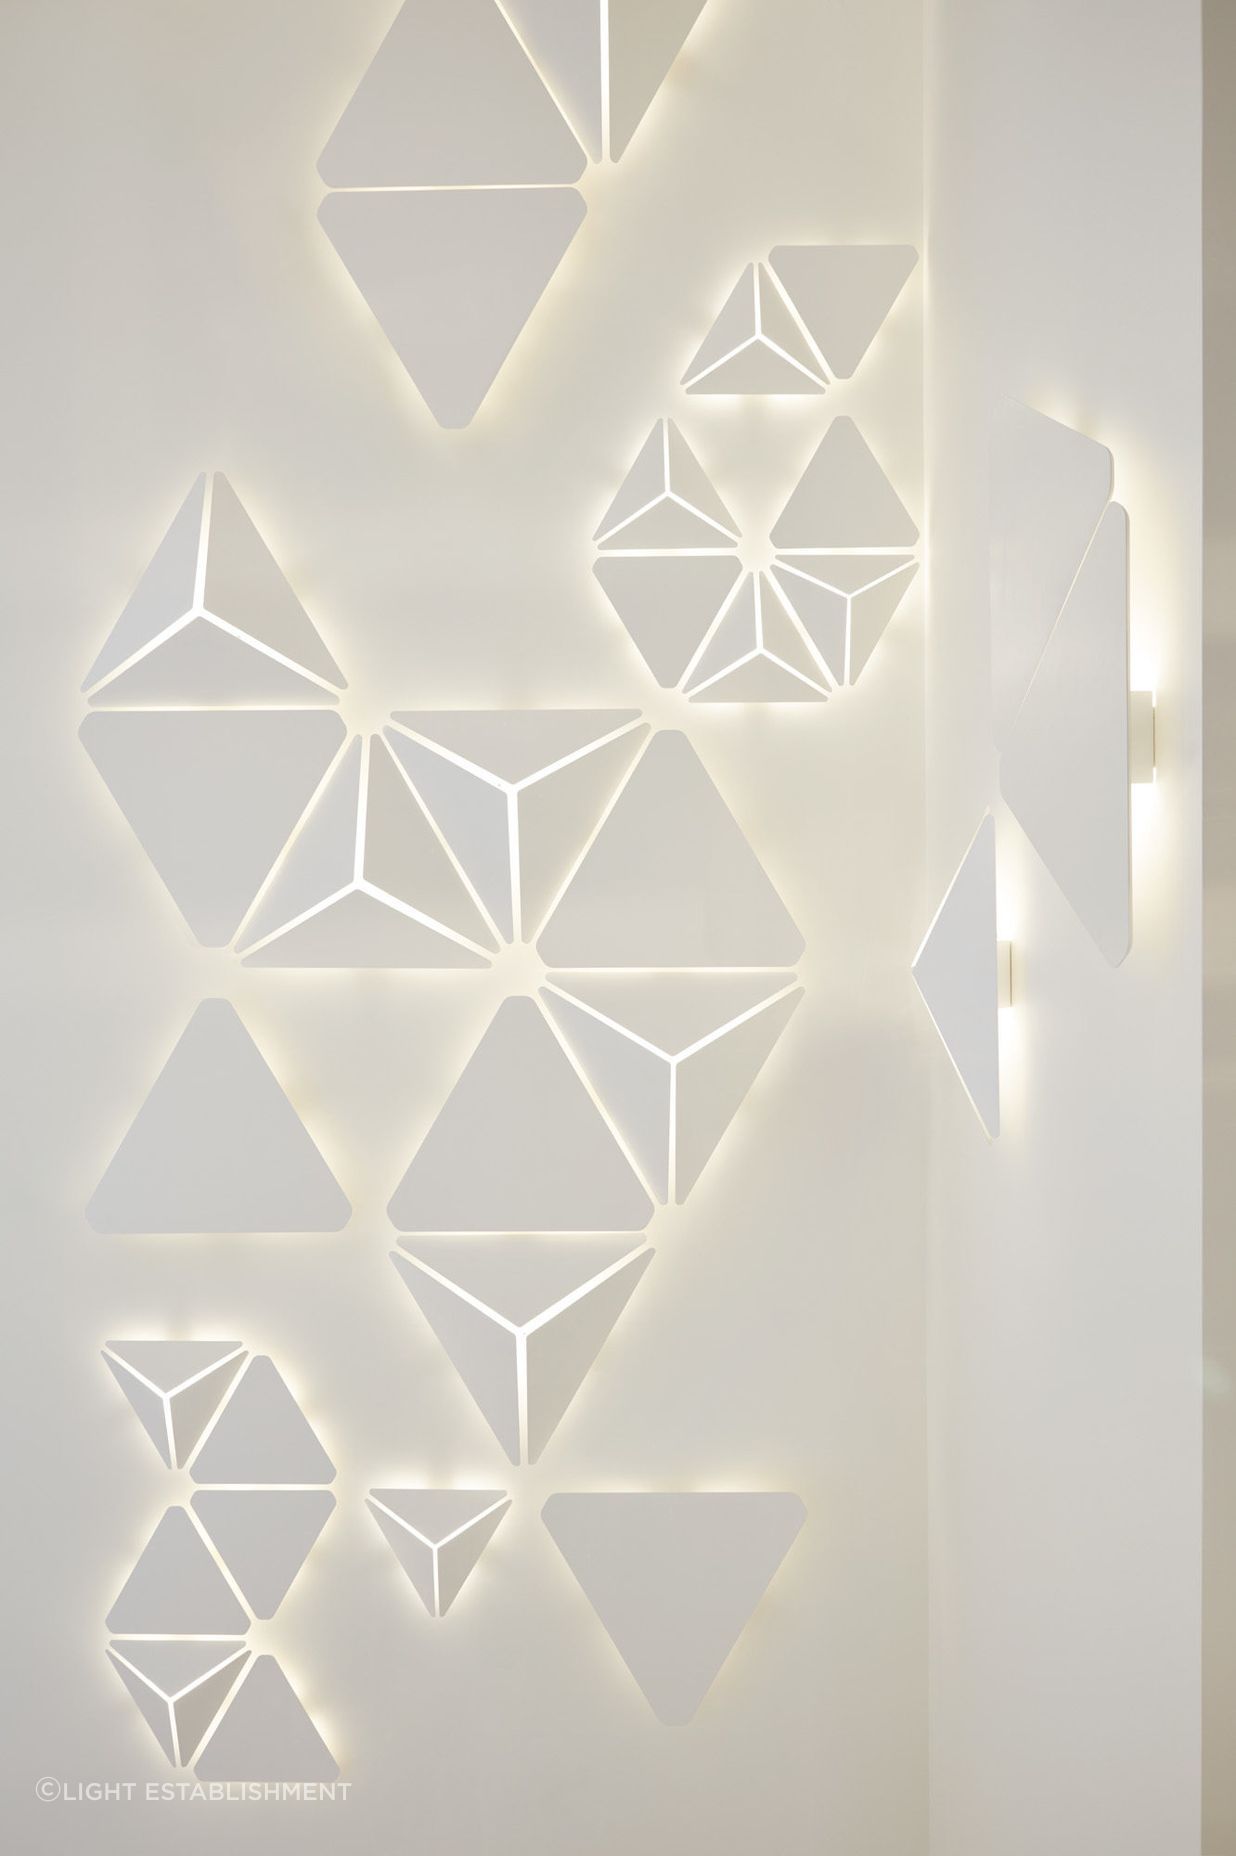 As a conceptual approach to atmospheric lighting, Lightgarden brings a playful touch to any space.